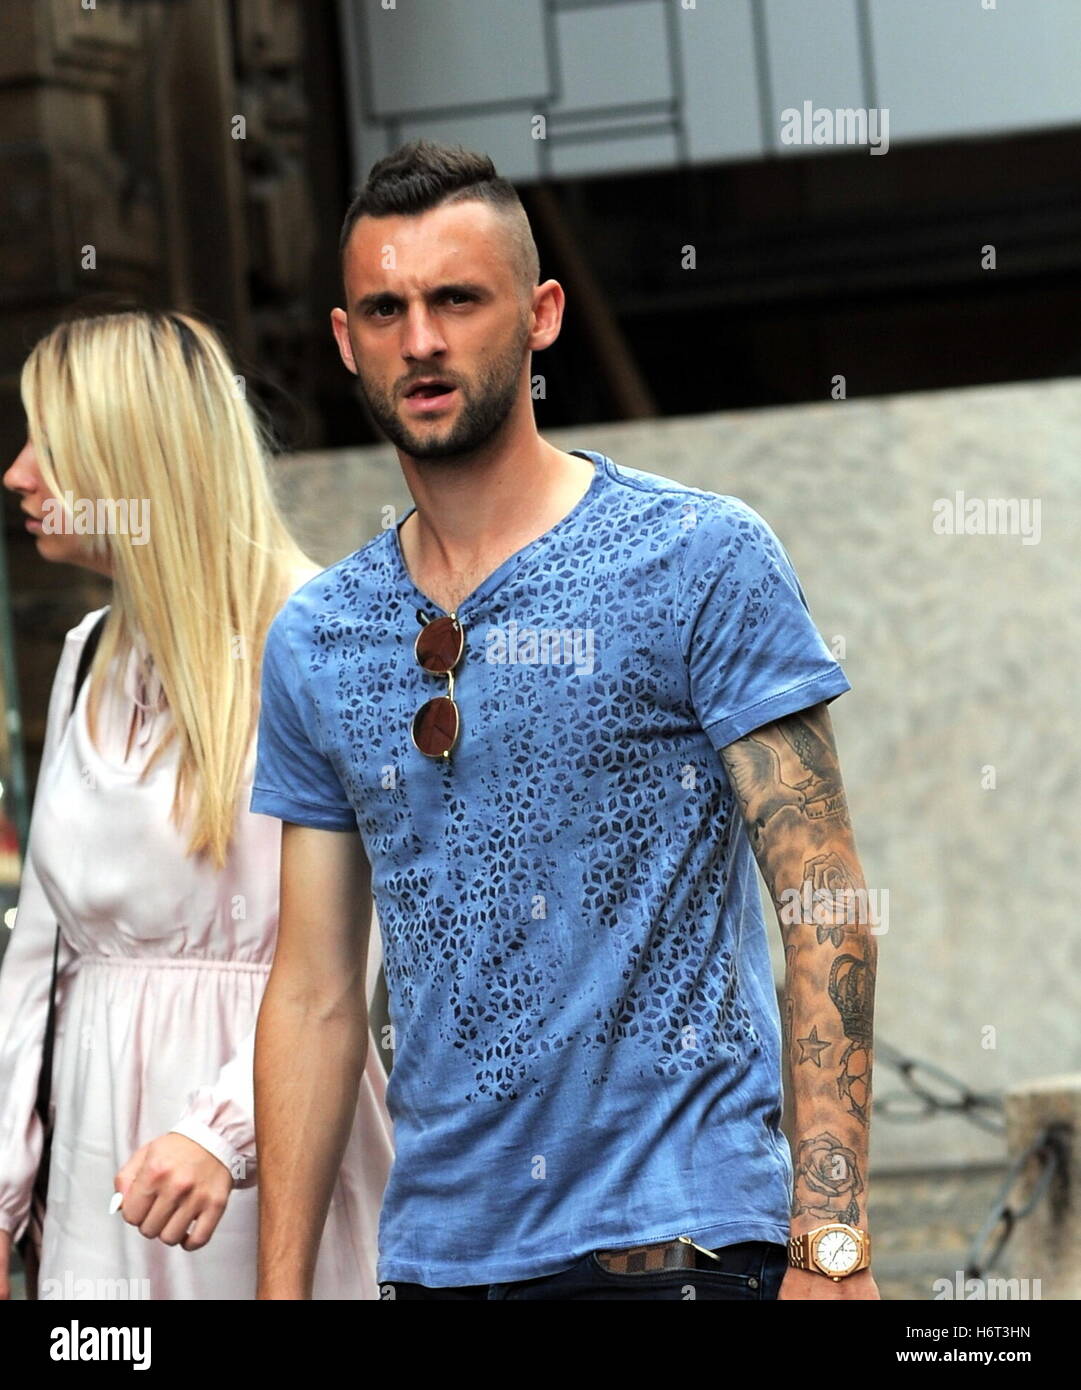 Croatian and Inter Milan footballer Marcelo Brozovic out shopping in Milan with his girlfriend  Featuring: Marcelo Brozovic Where: Milan, Italy When: 30 Sep 2016 Credit: IPA/WENN.com  **Only available for publication in UK, USA, Germany, Austria, Switzerl Stock Photo